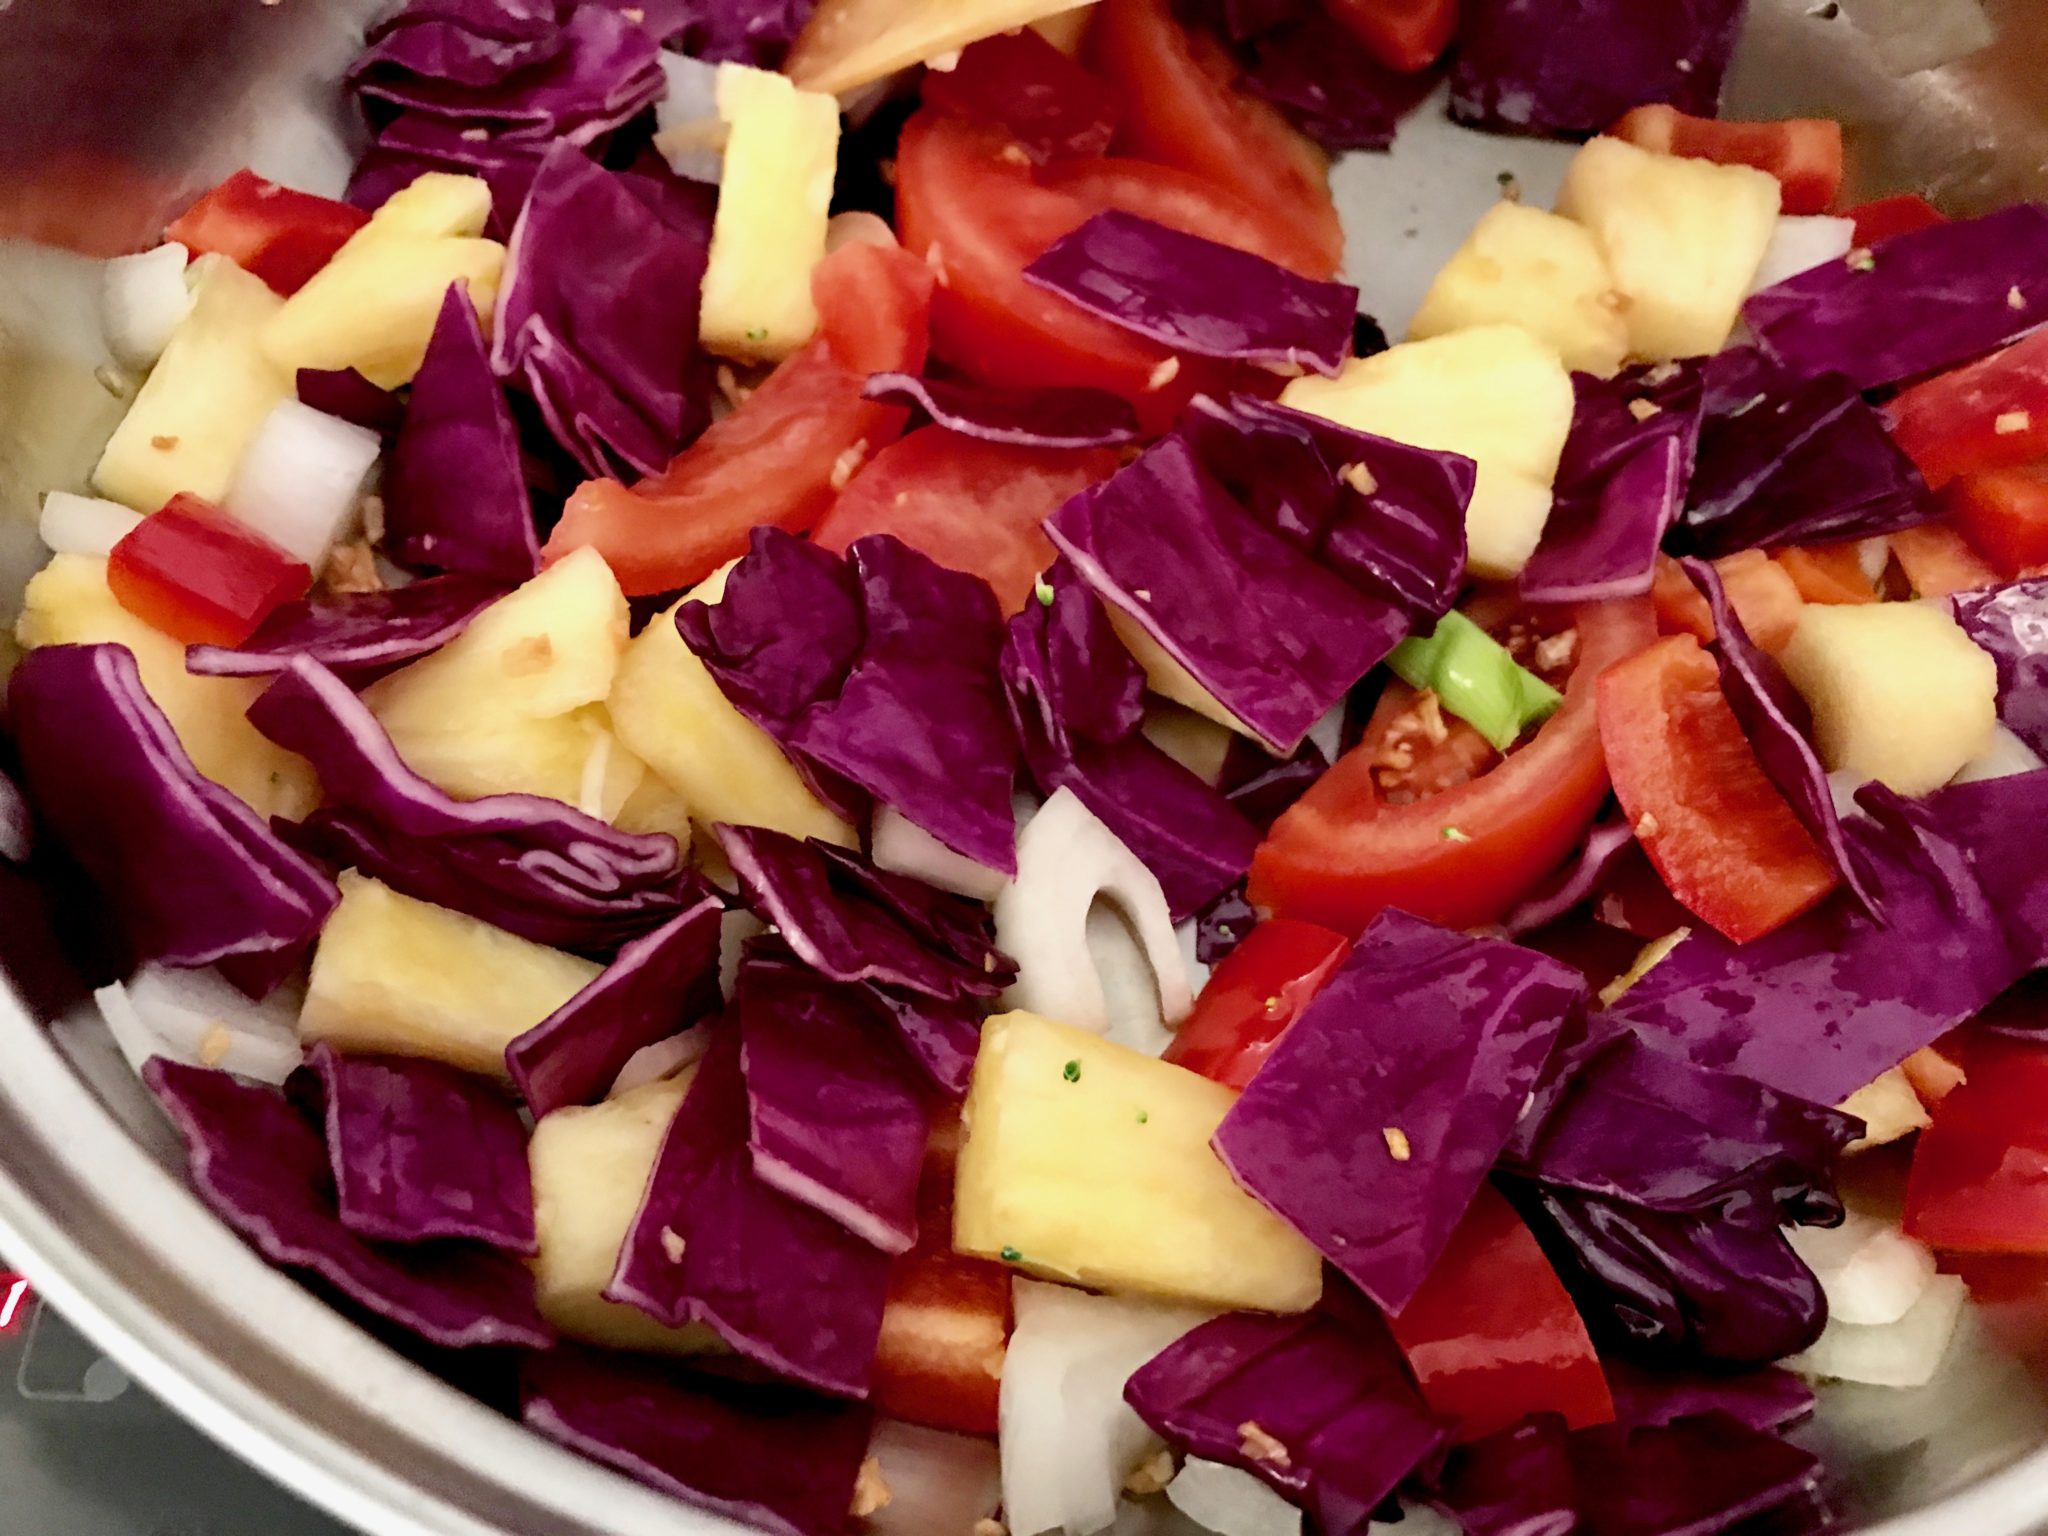 stir fry onion, red cabbage, tomatoes, and pineapples first